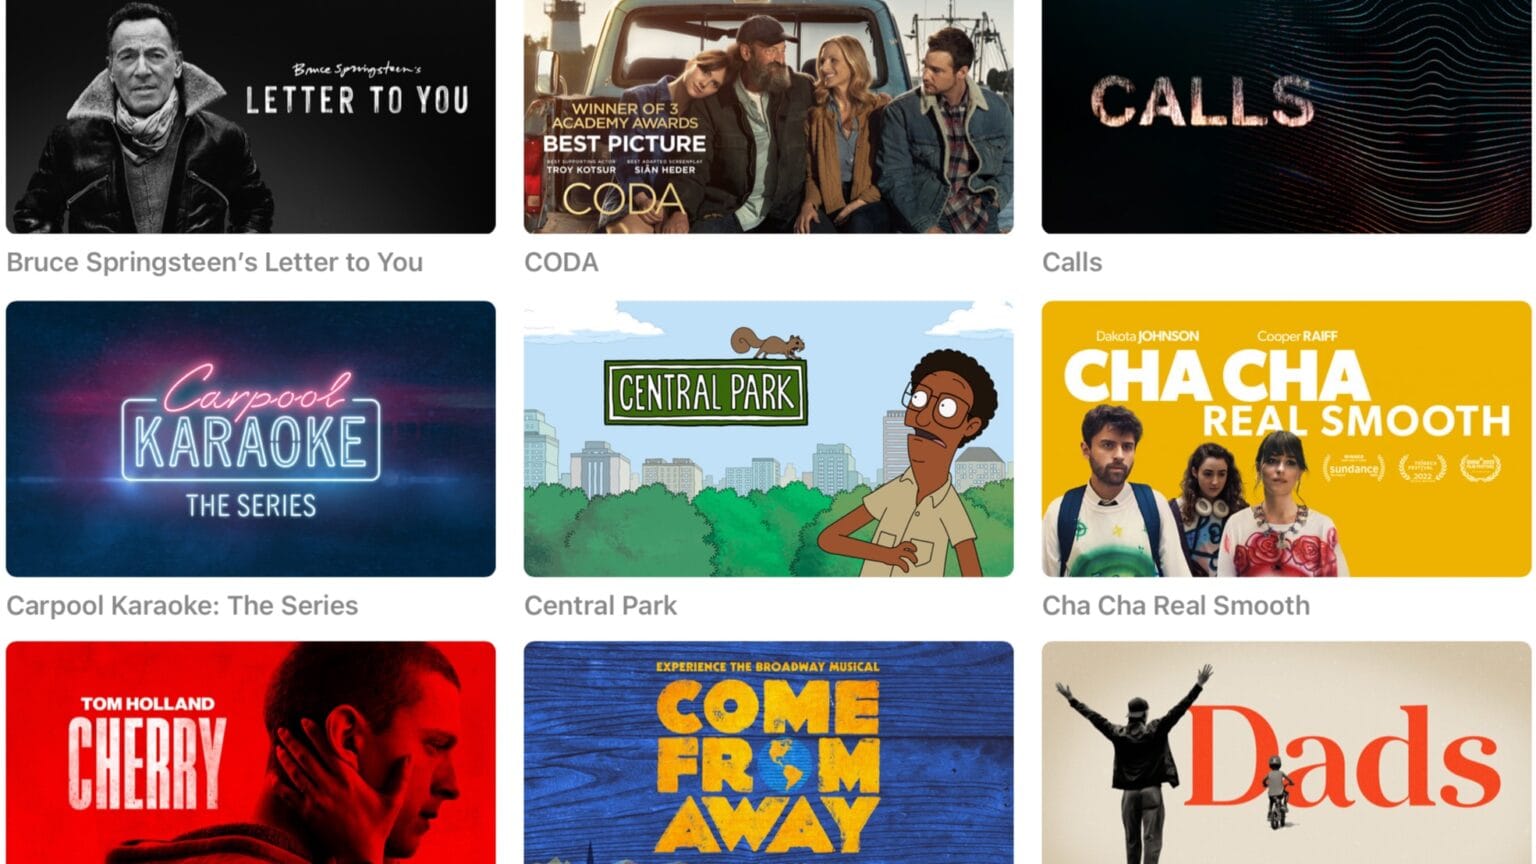 Apple TV+ offers higher-rated films and series than any rival streaming service